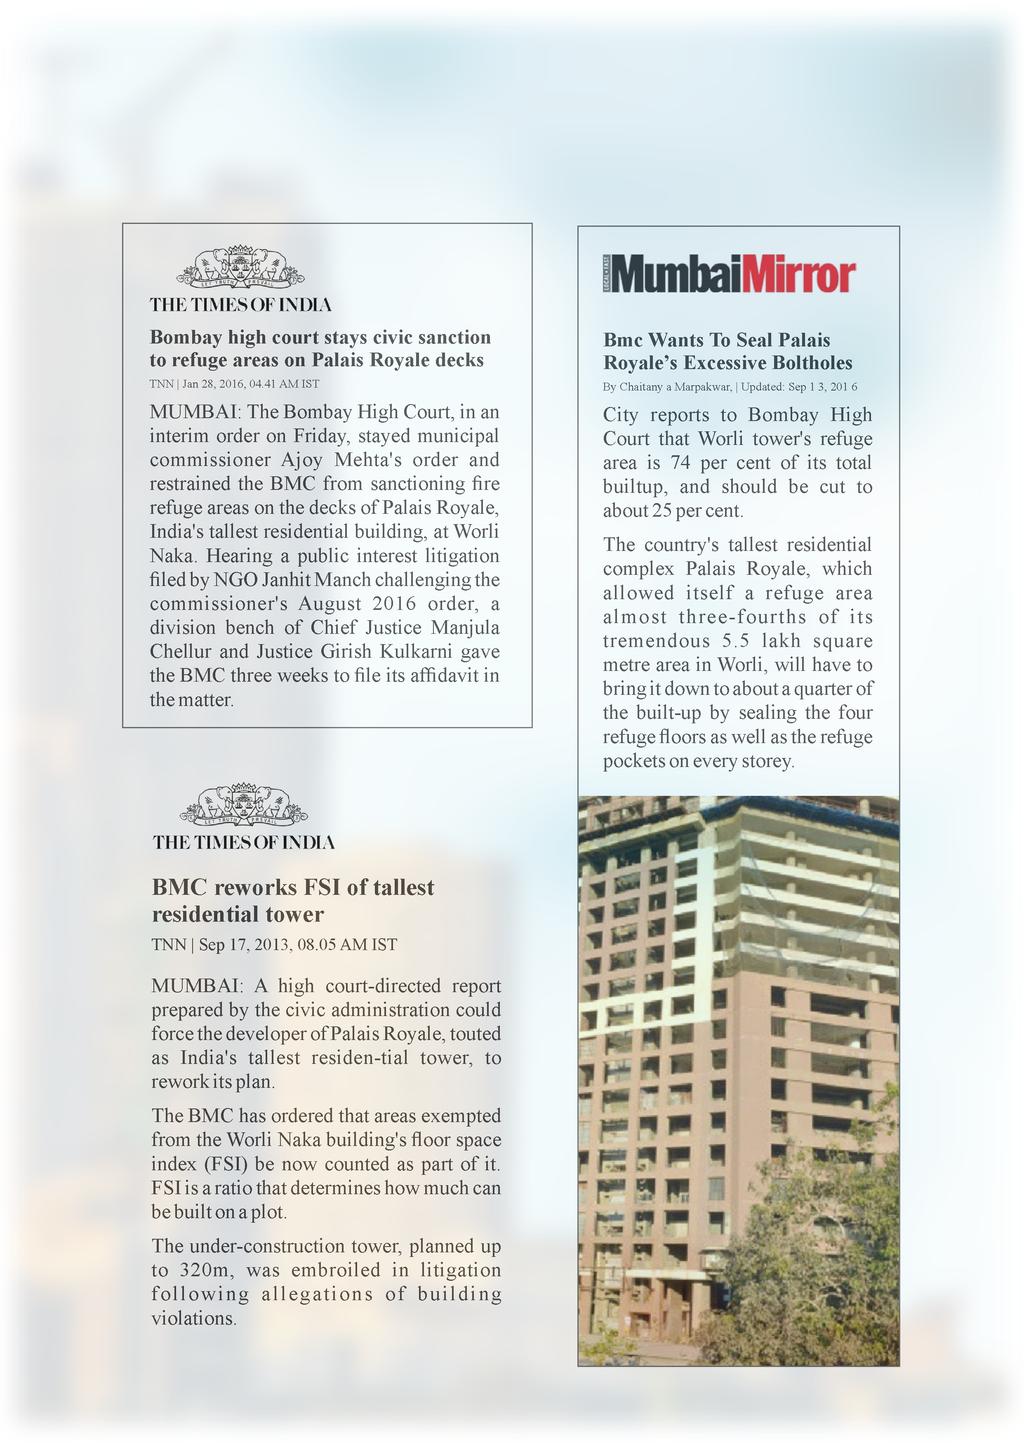 BMC three weeks to ﬁle its afﬁdavit in the matter. City reports to Bombay High Court that Worli tower's refuge area is 74 per cent of its total builtup, and should be cut to about 25 per cent.